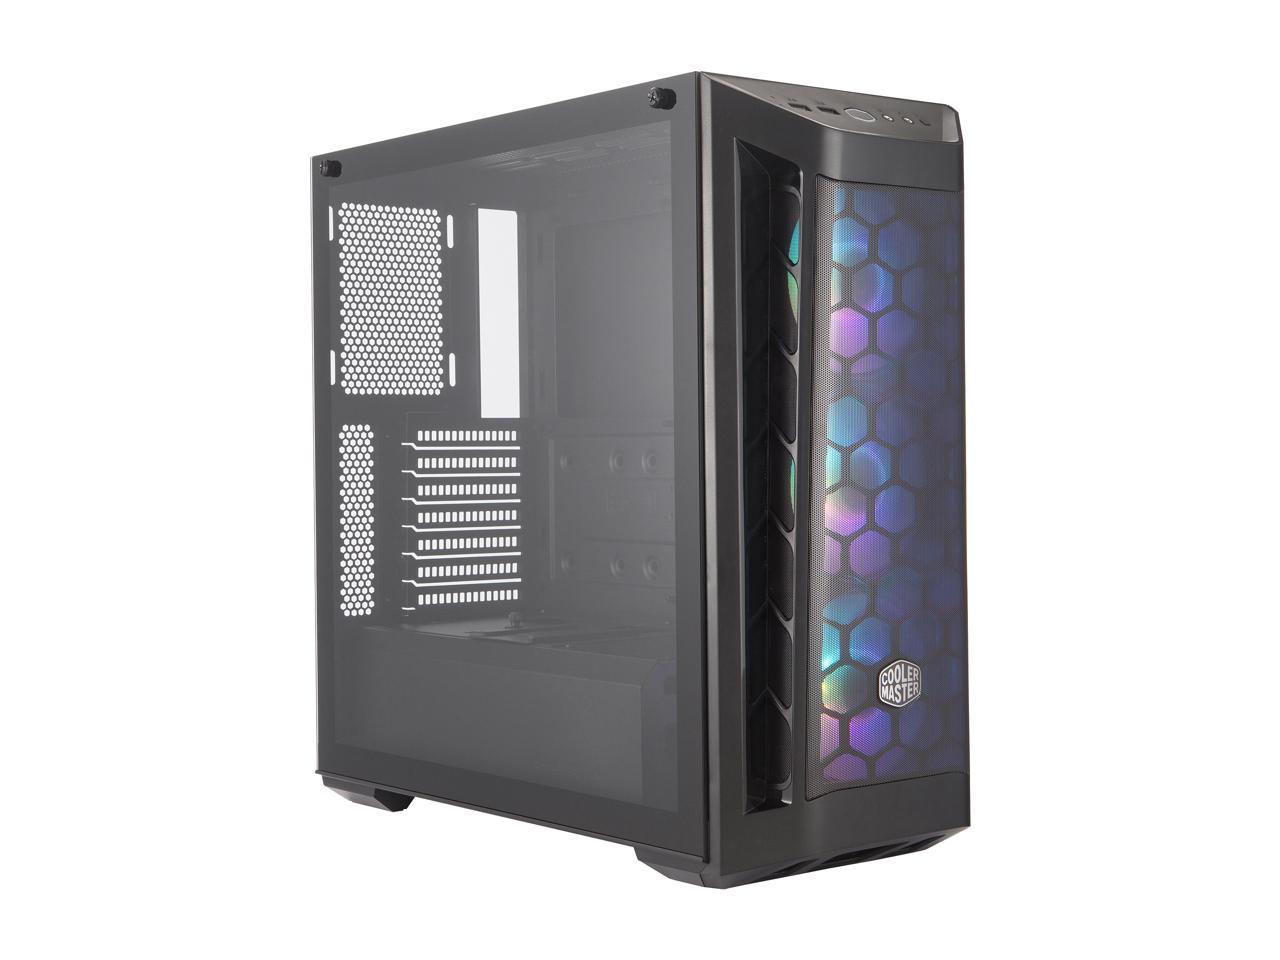 Cooler Master MasterBox MB511 ARGB ATX Mid-Tower with ARGB Lighting System, Three 120mm ARGB Fans, Fine Mesh Front Panel, Mesh Side Intakes, and Tempered Glass. MCB-B511D-KGNN-RGA